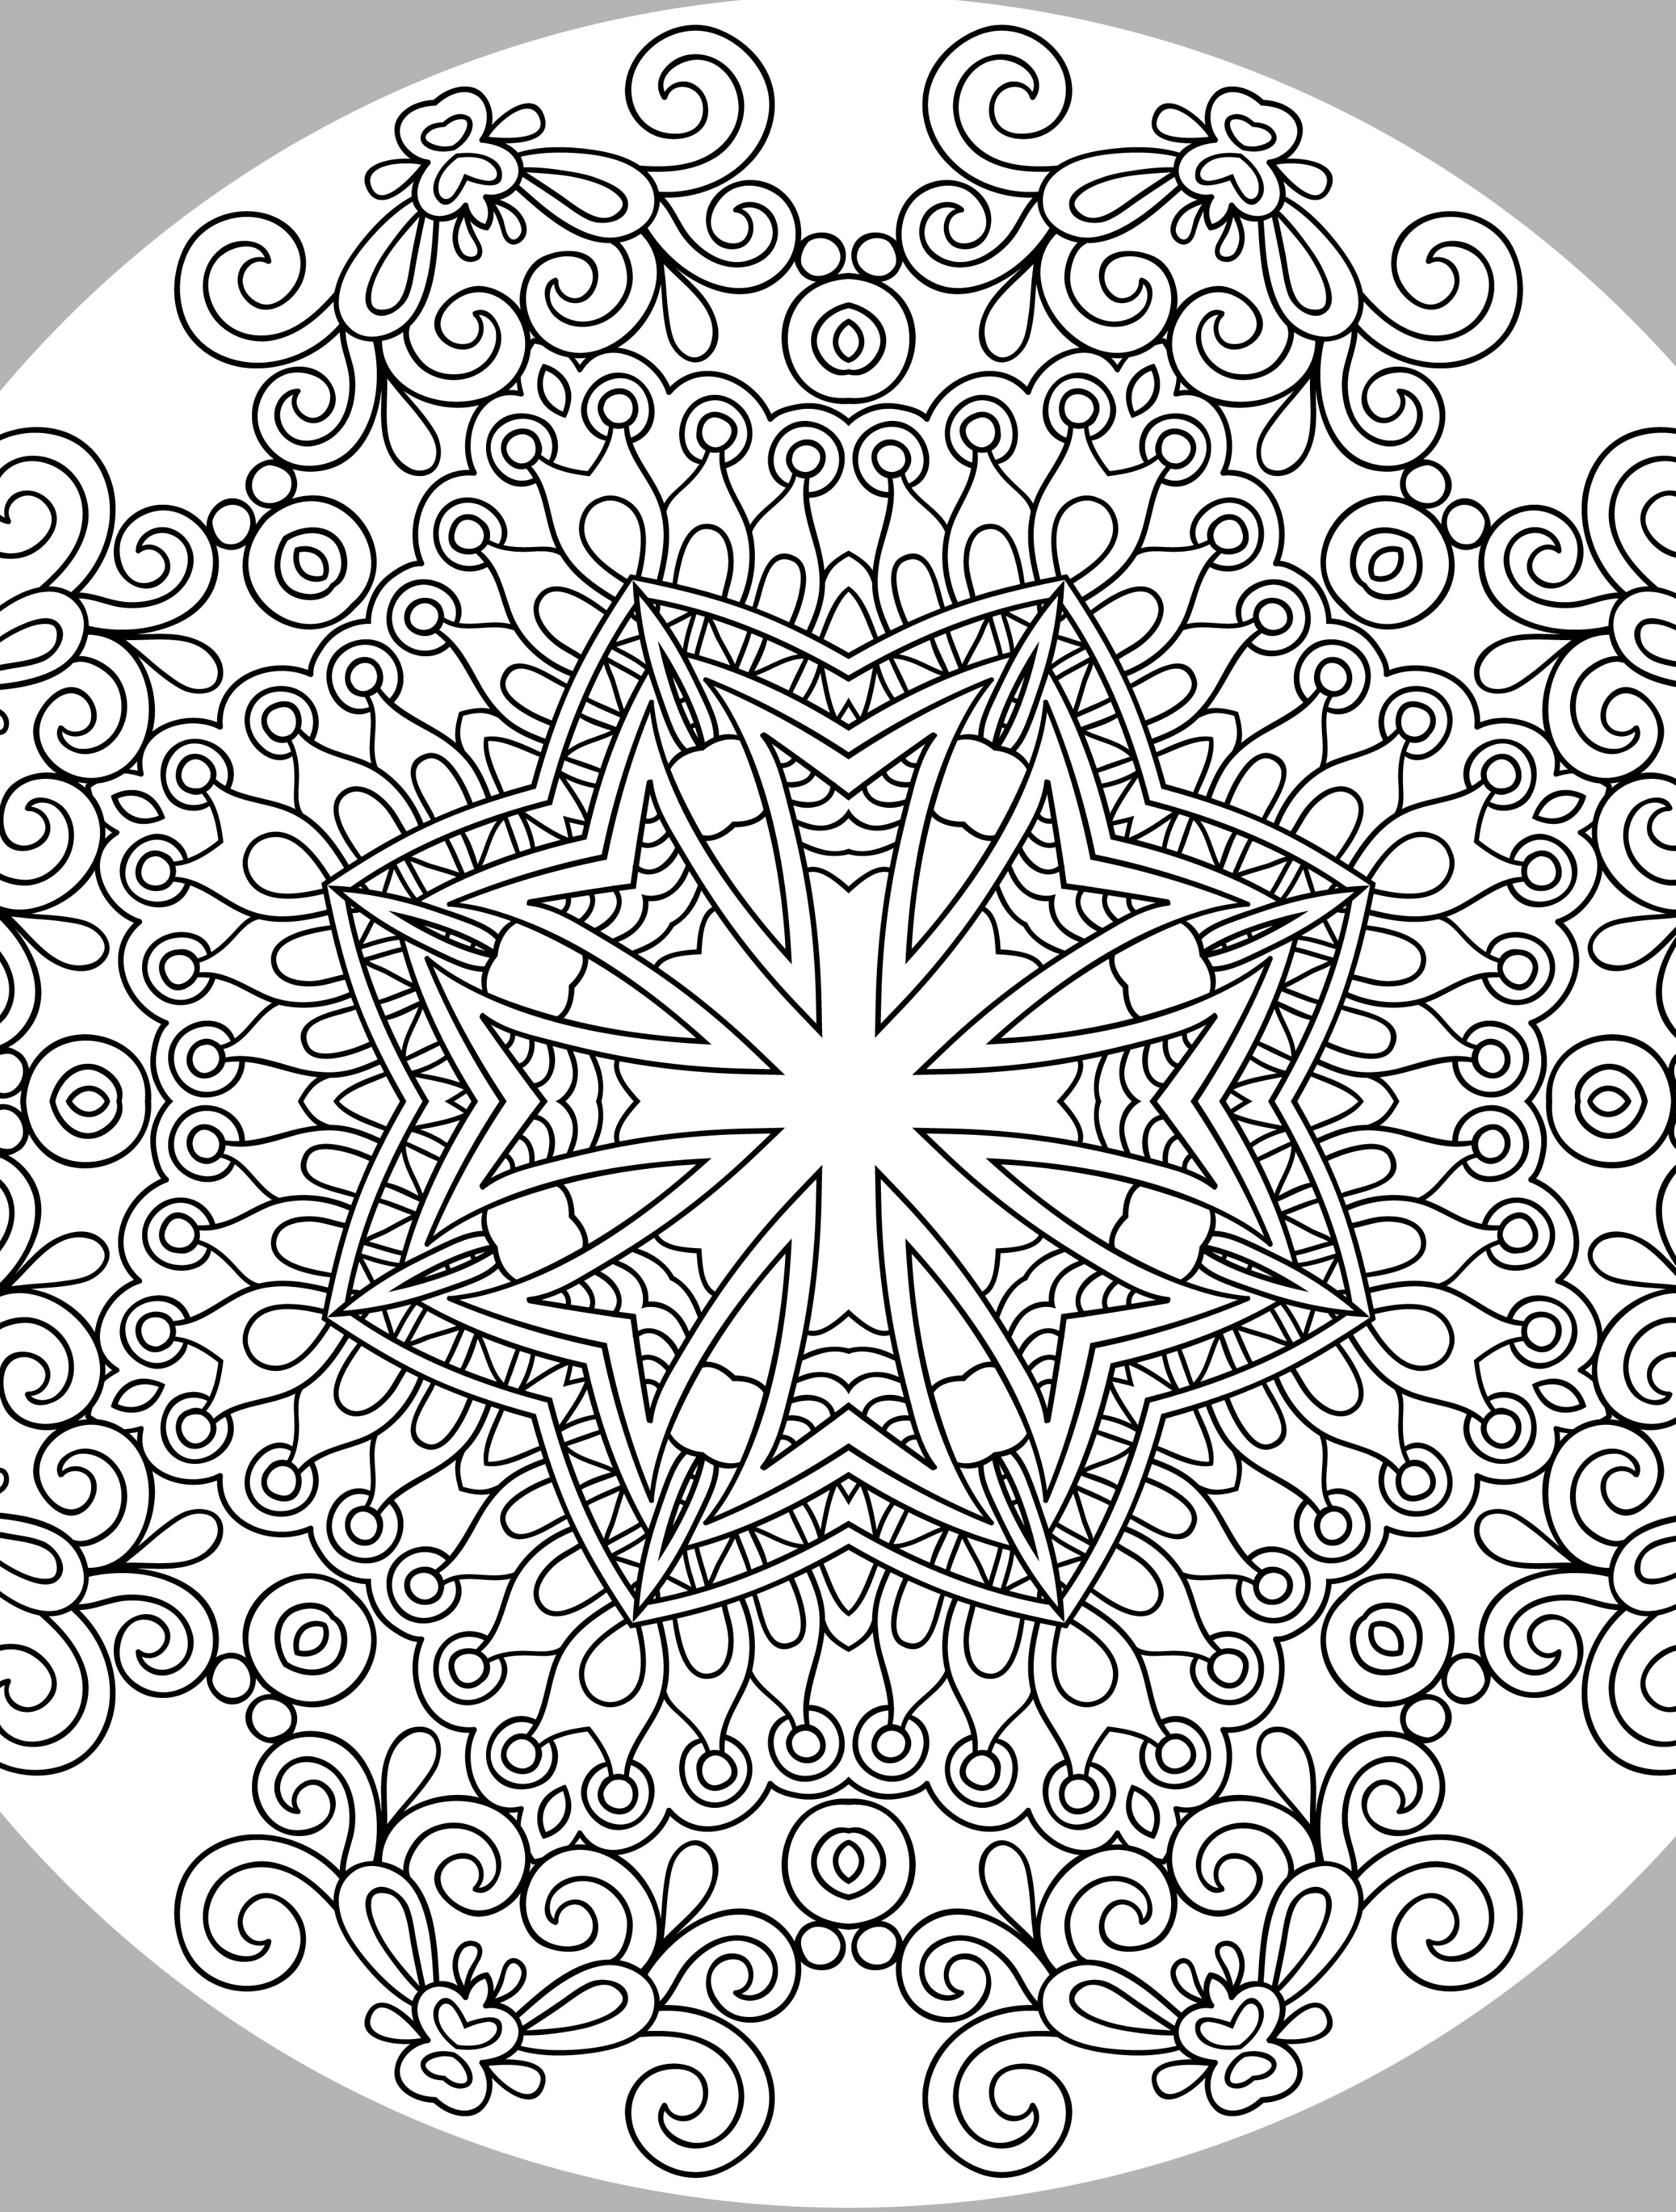 Printable Christmas Coloring Pages For Adults at ...